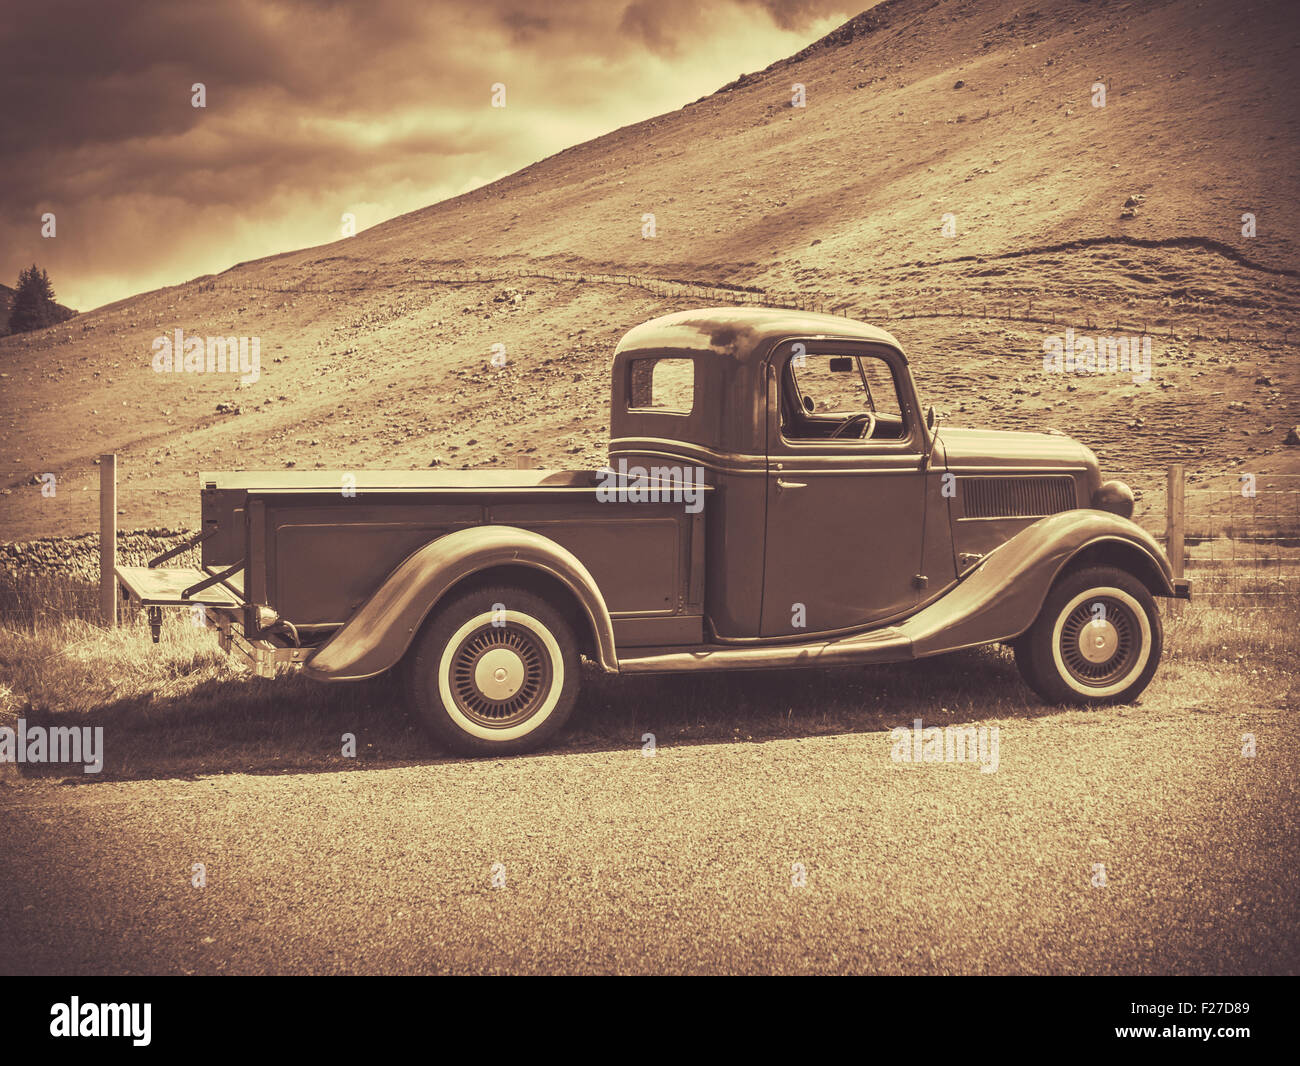 Retro Style Sepia Image Of A Vintage Truck In The Countryside Stock Photo